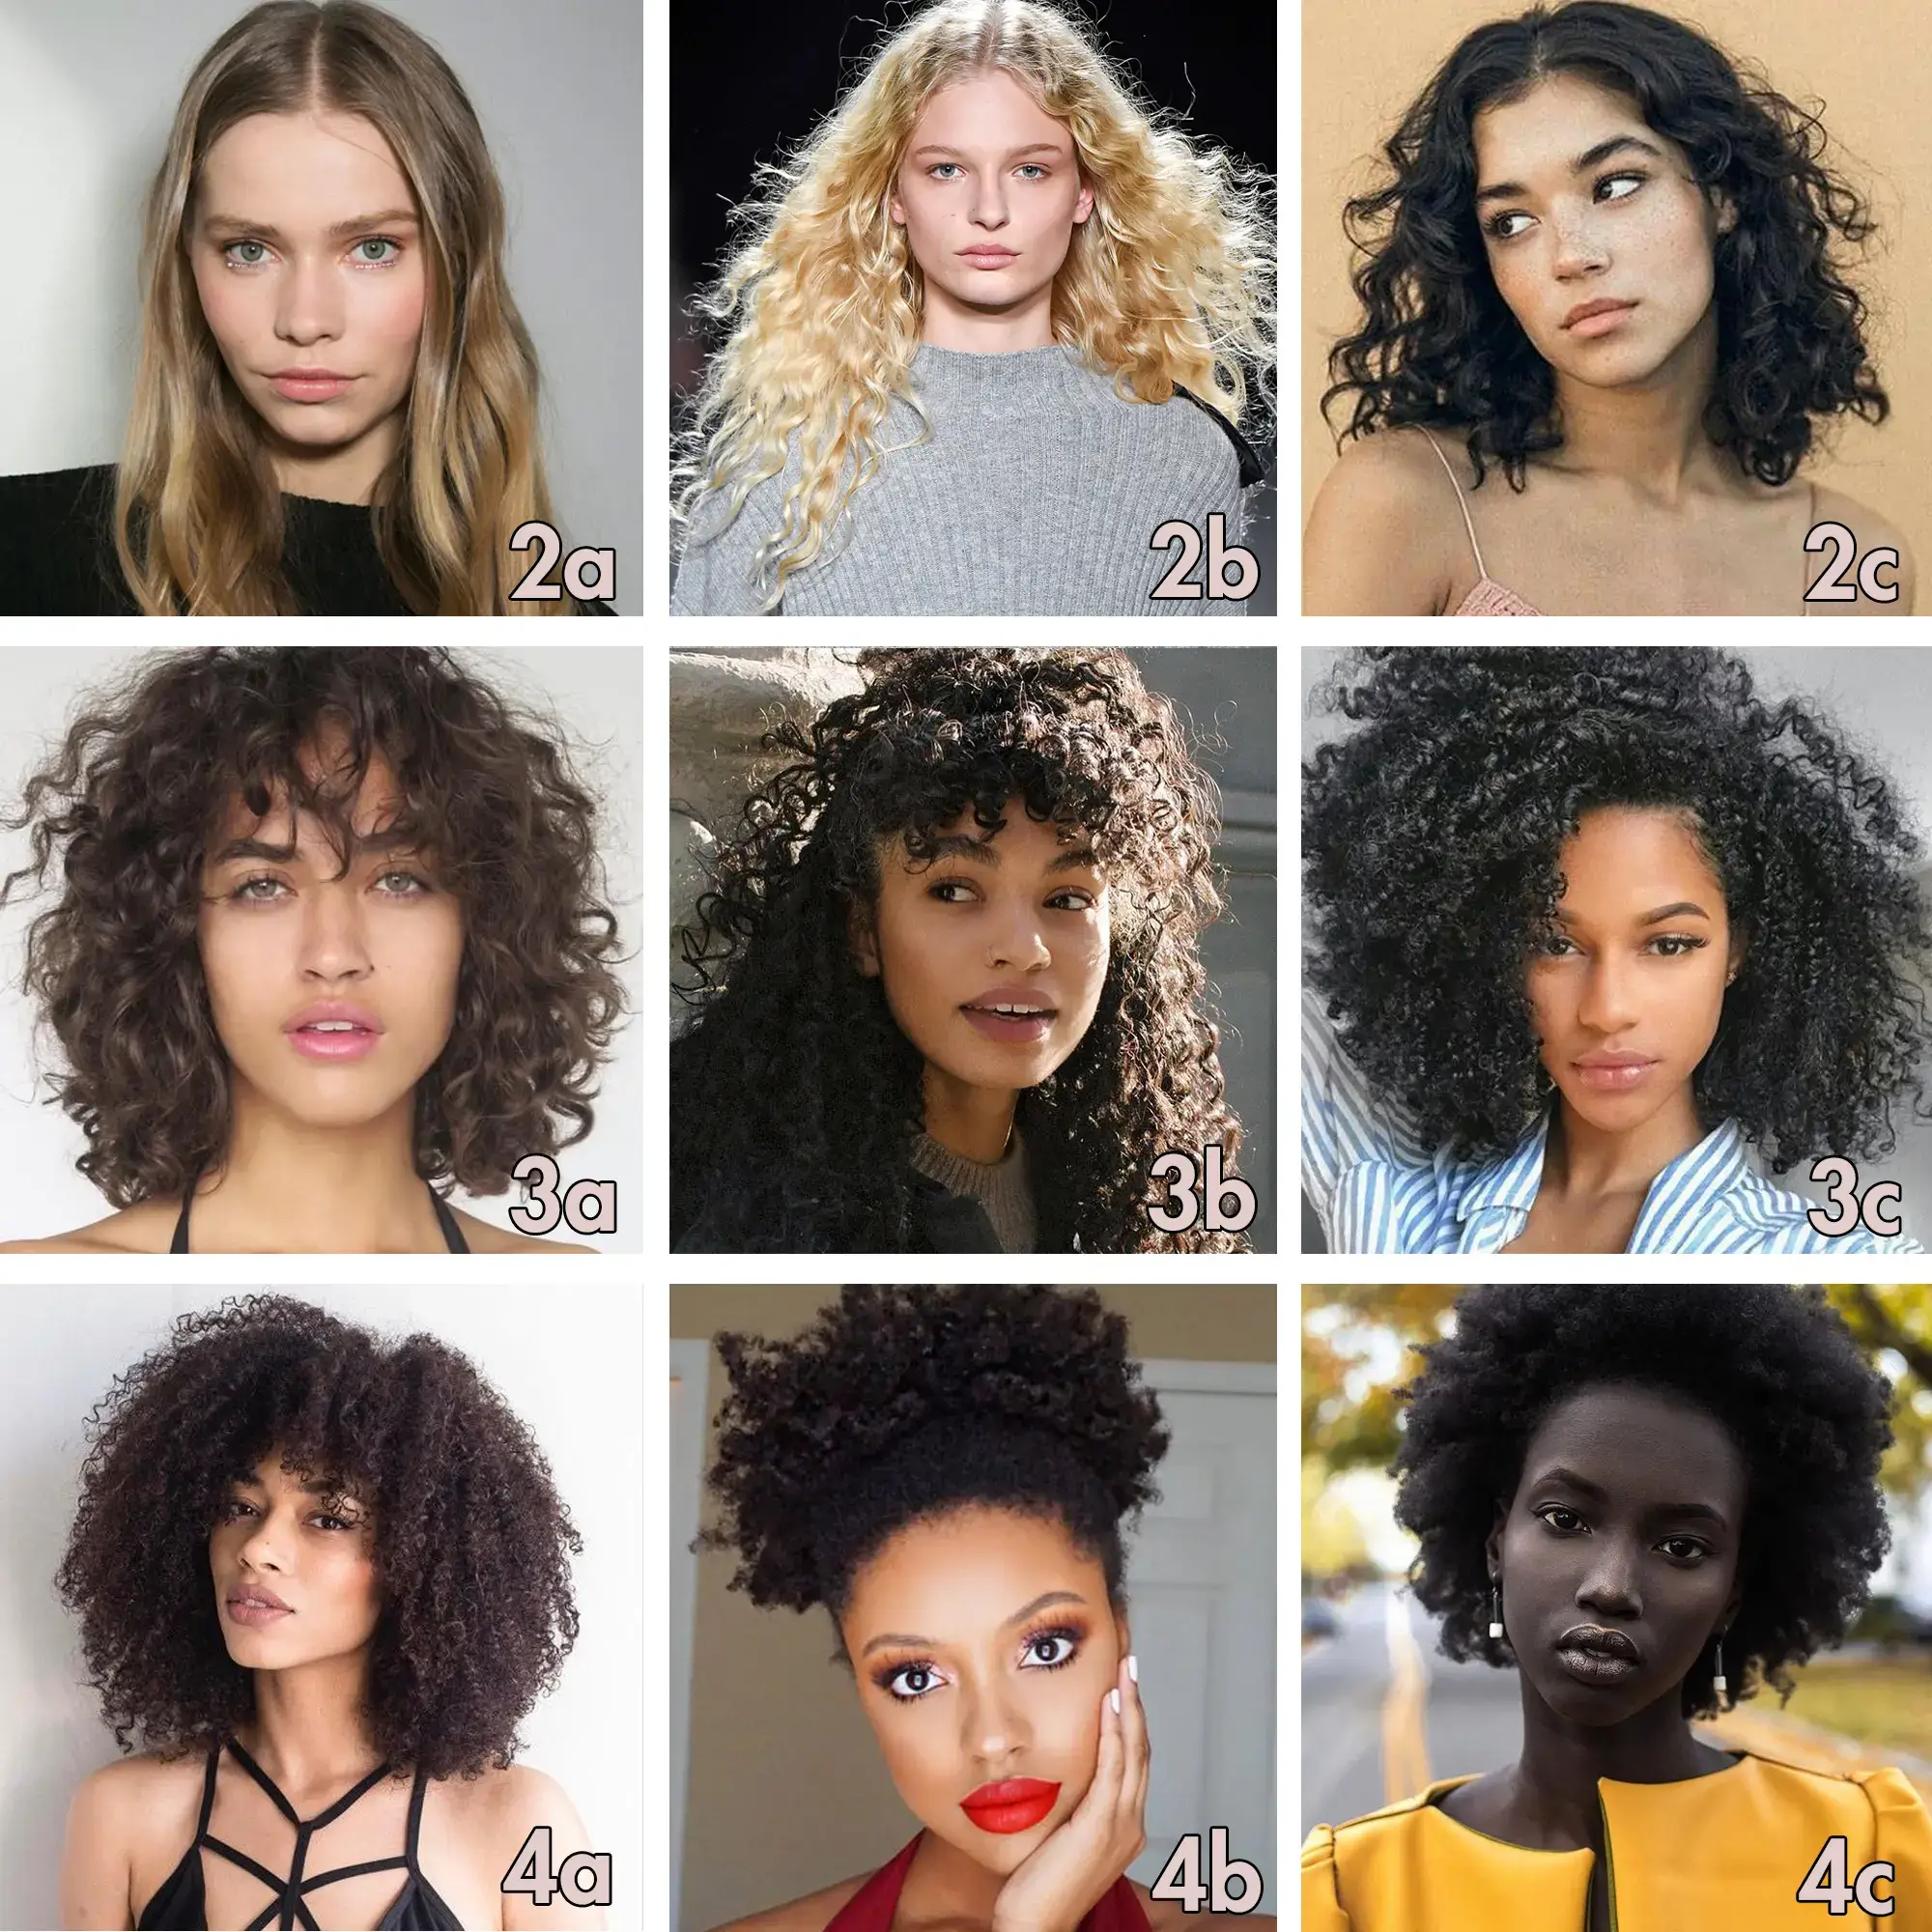 Variety of women showcasing different hair types and textures.